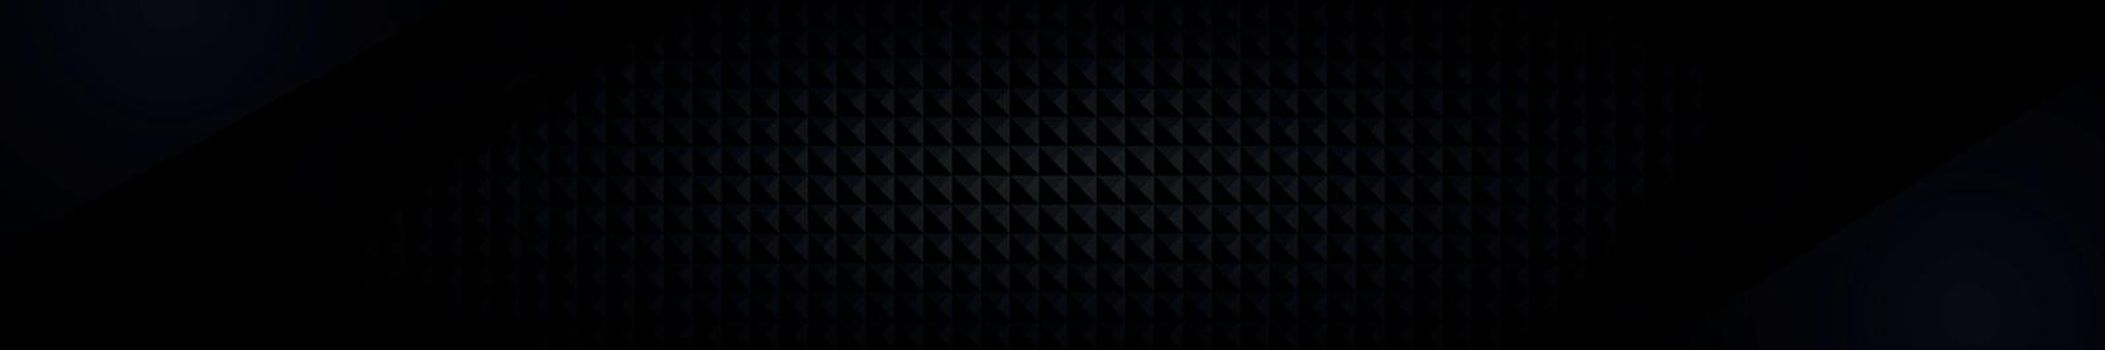 Abstract black background of many small squares